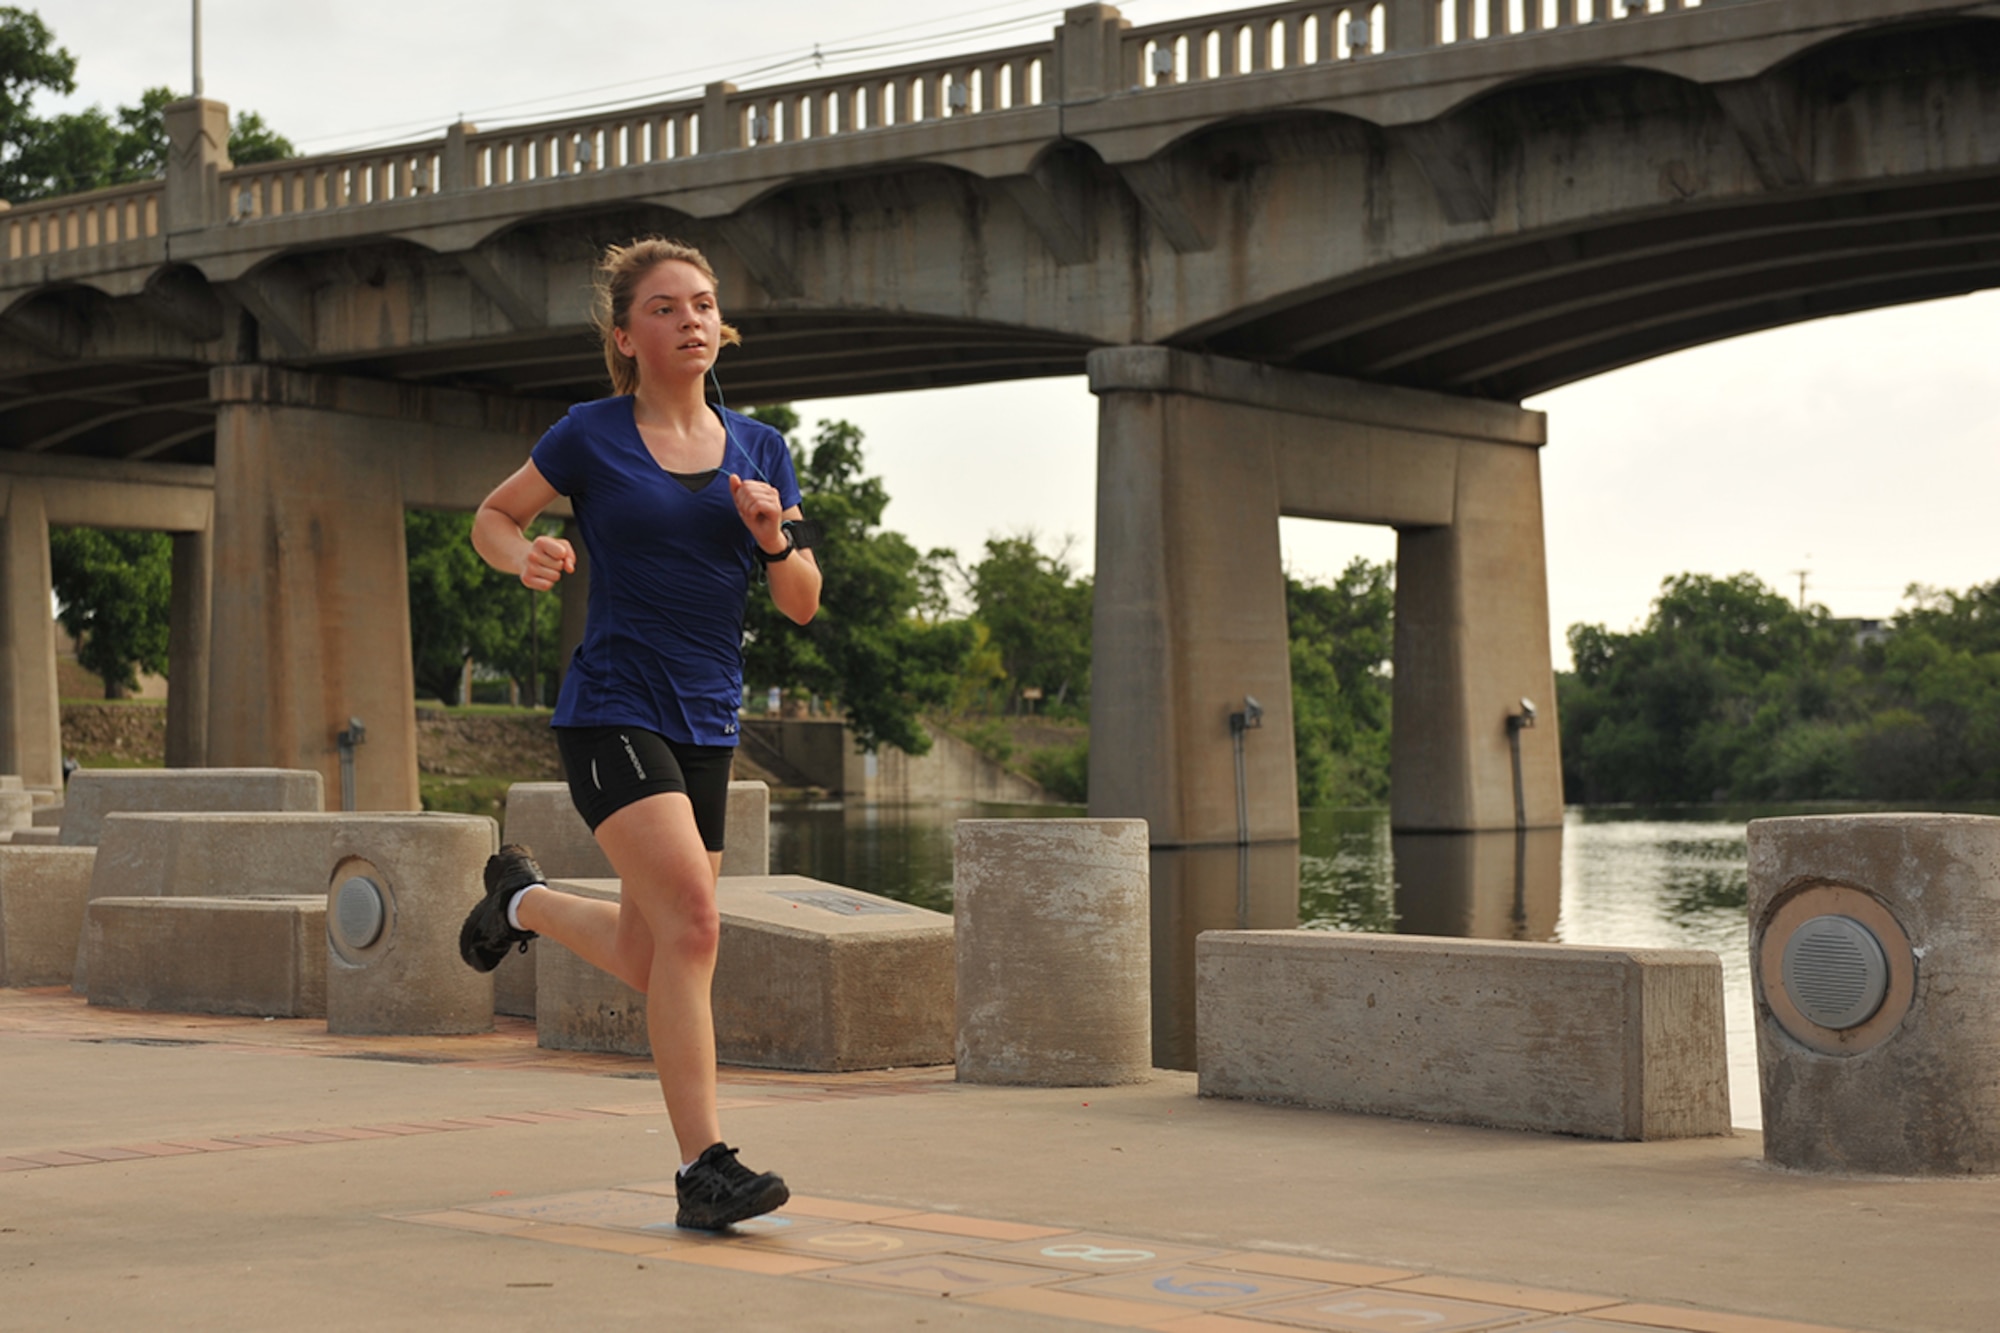 U.S. Air Force Airman 1st Class Alicia Hansen, 316th Training Squadron student, runs across Celebration Bridge during the Lt. Goodfellow 7.5k run in San Angelo, Texas, May 21, 2016. Goodfellow Air Force Base hosted the run to celebrate its 75th anniversary and the birth of 1st Lt. John J. Goodfellow. (U.S. Air Force by Airman 1st Class Caelynn Ferguson/Released)